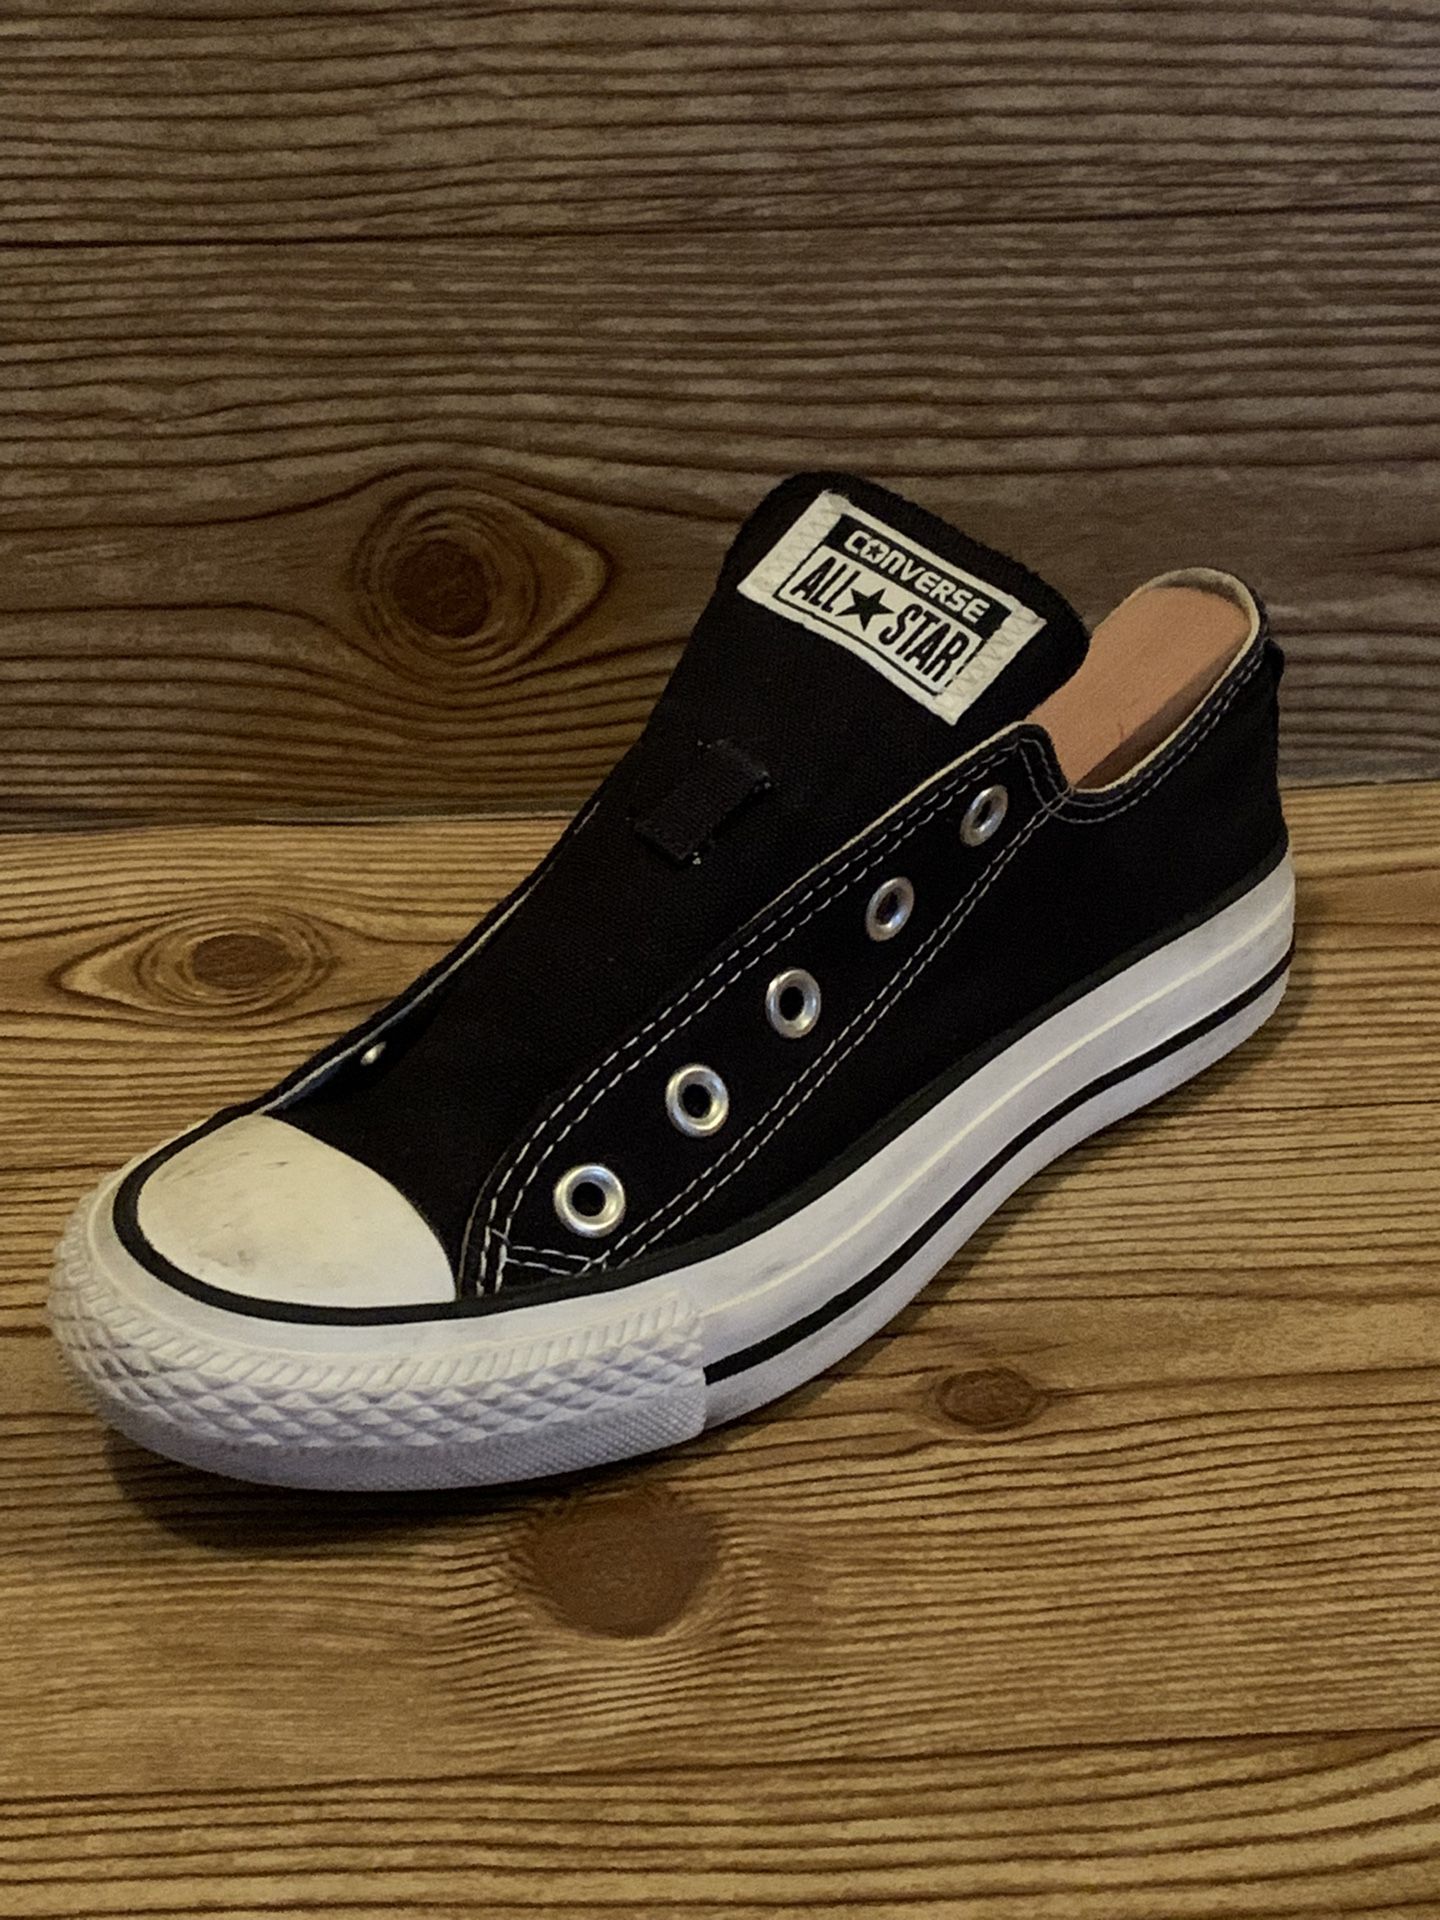 Lærerens dag Lake Taupo udelukkende Converse All Star Classic Black & White Sneakers (size Women 6/Men 4) for  Sale in Salida, CA - OfferUp